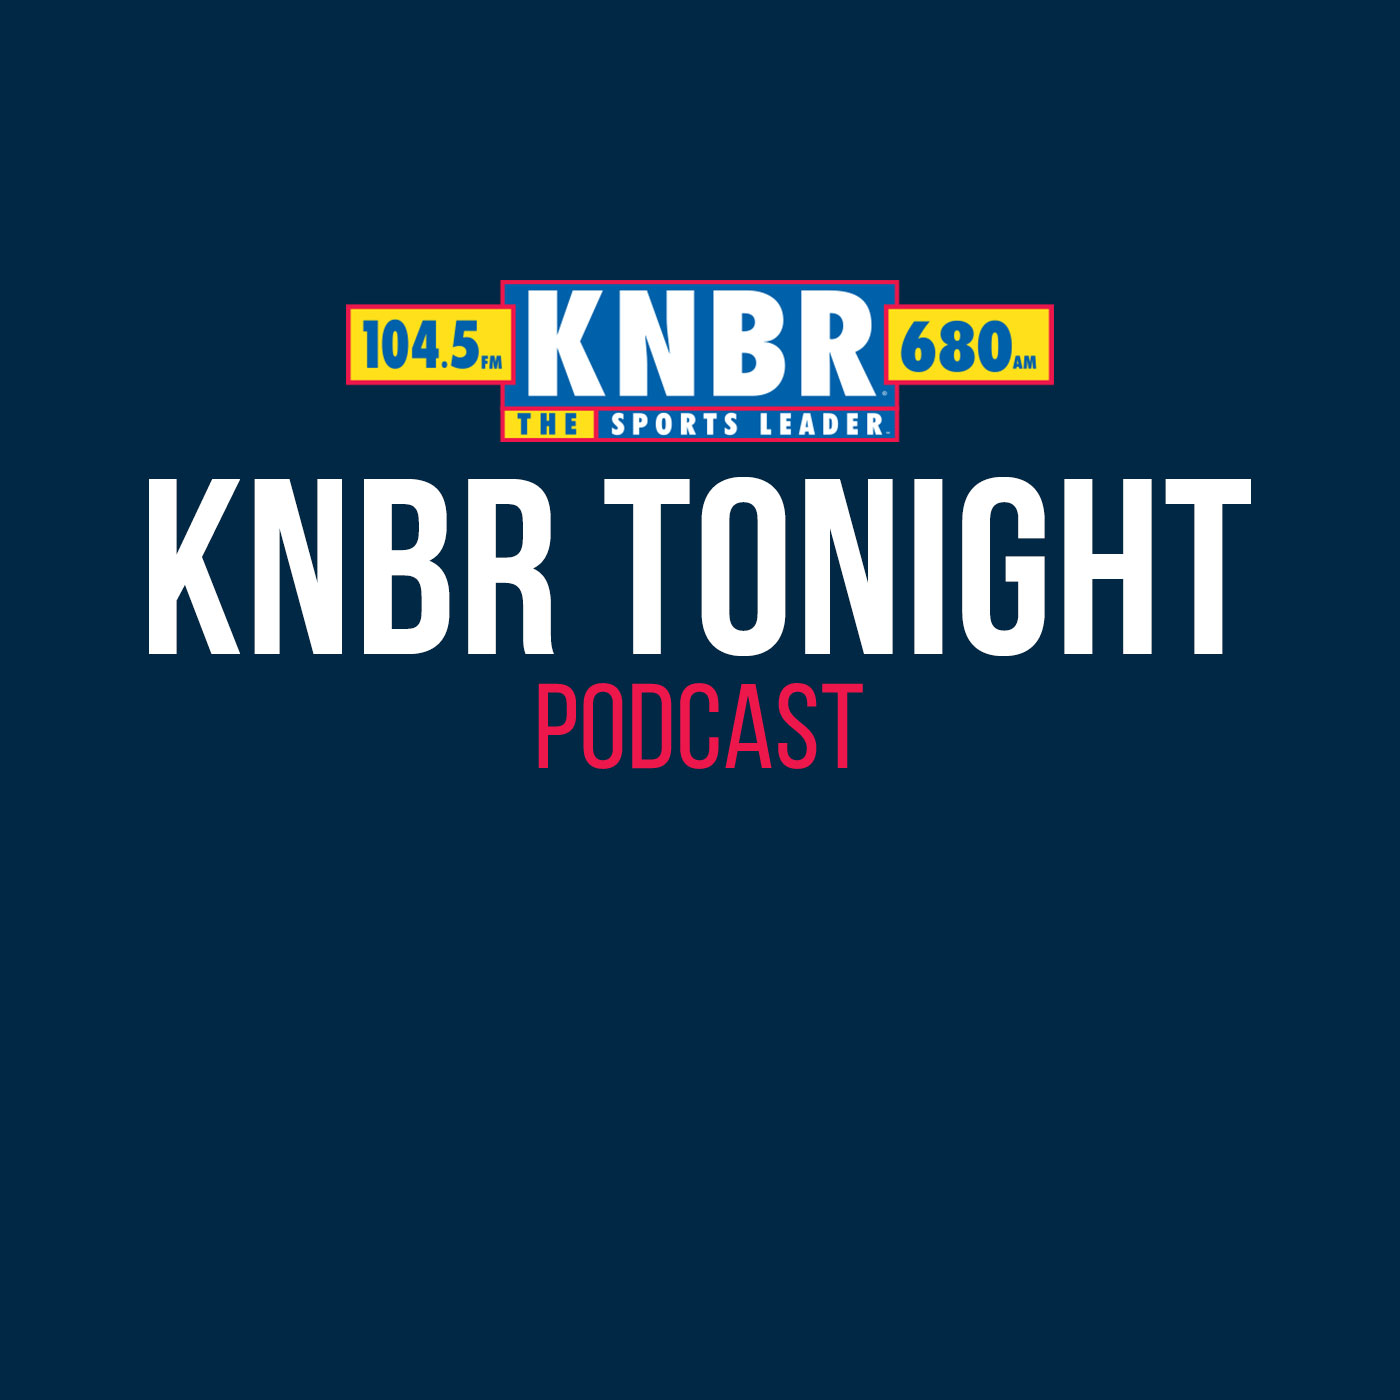 2-9 Dalton Johnson joins Dieter Kurtenbach on KNBR Tonight and explains why James Wiseman is exactly who the Warriors need down the stretch in the playoffs